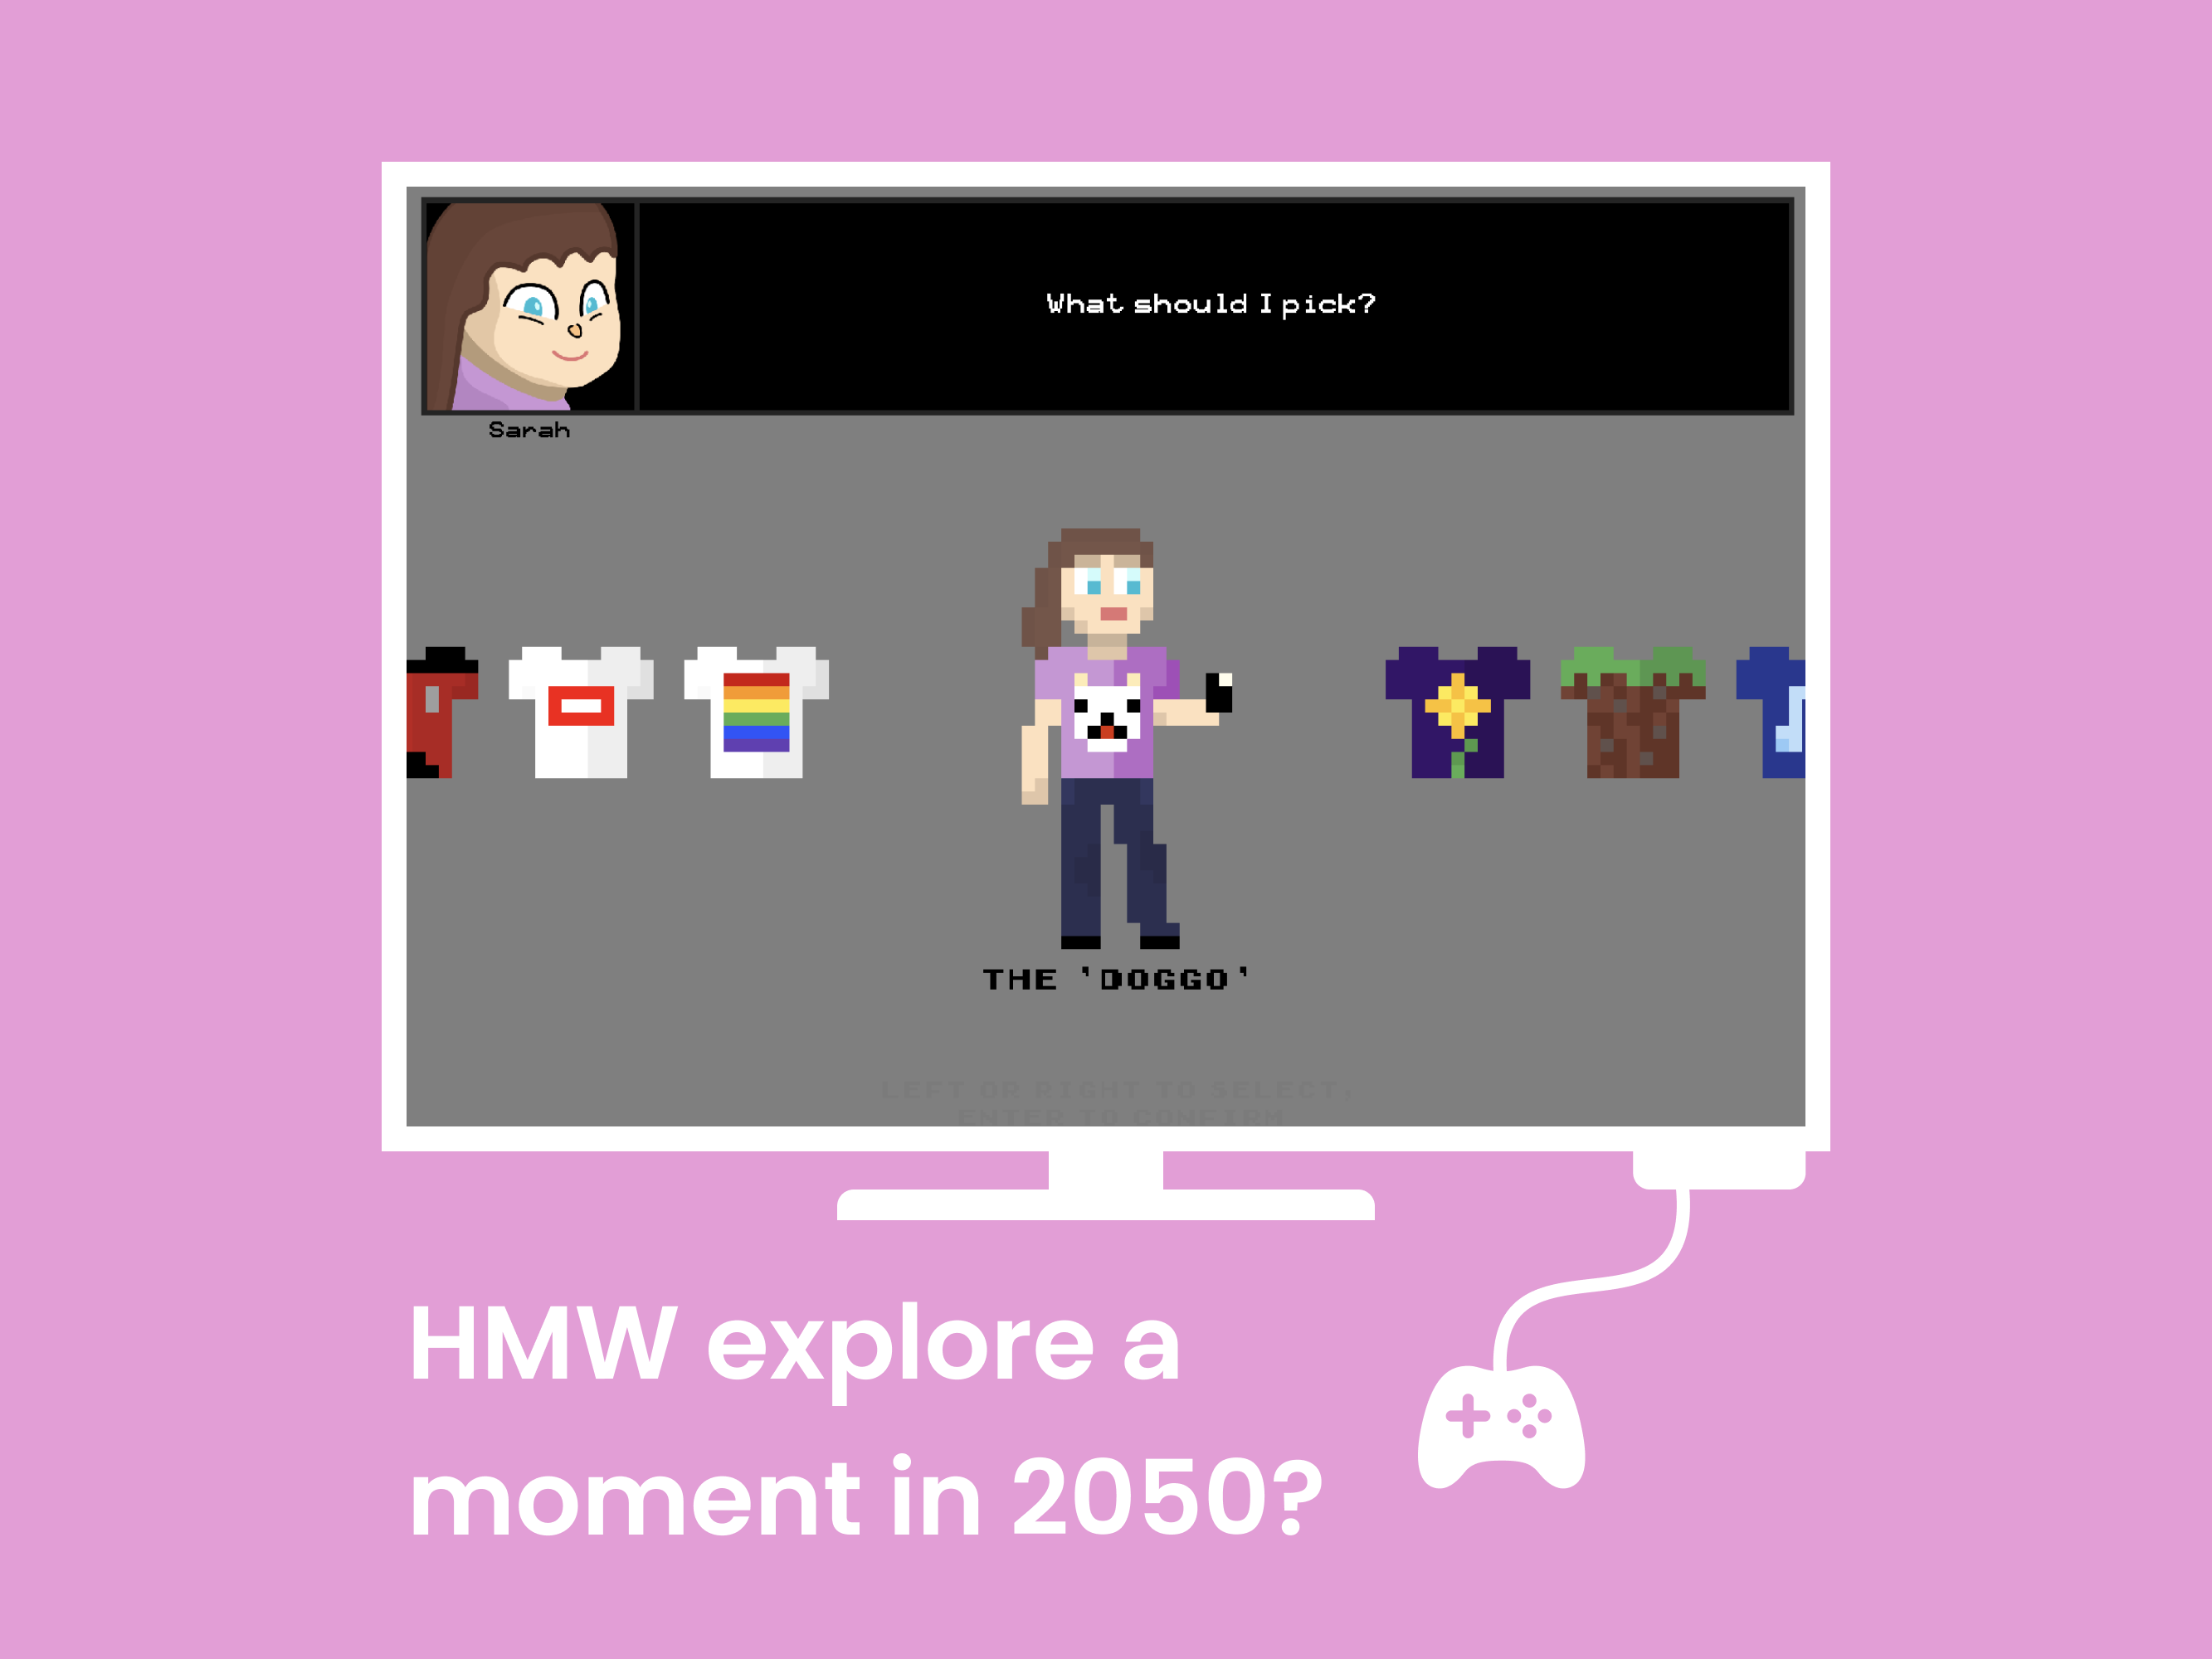 Choices 2050 video game on a 2D rendering of a monitor with text: 'HMW explore a moment in 2050?'